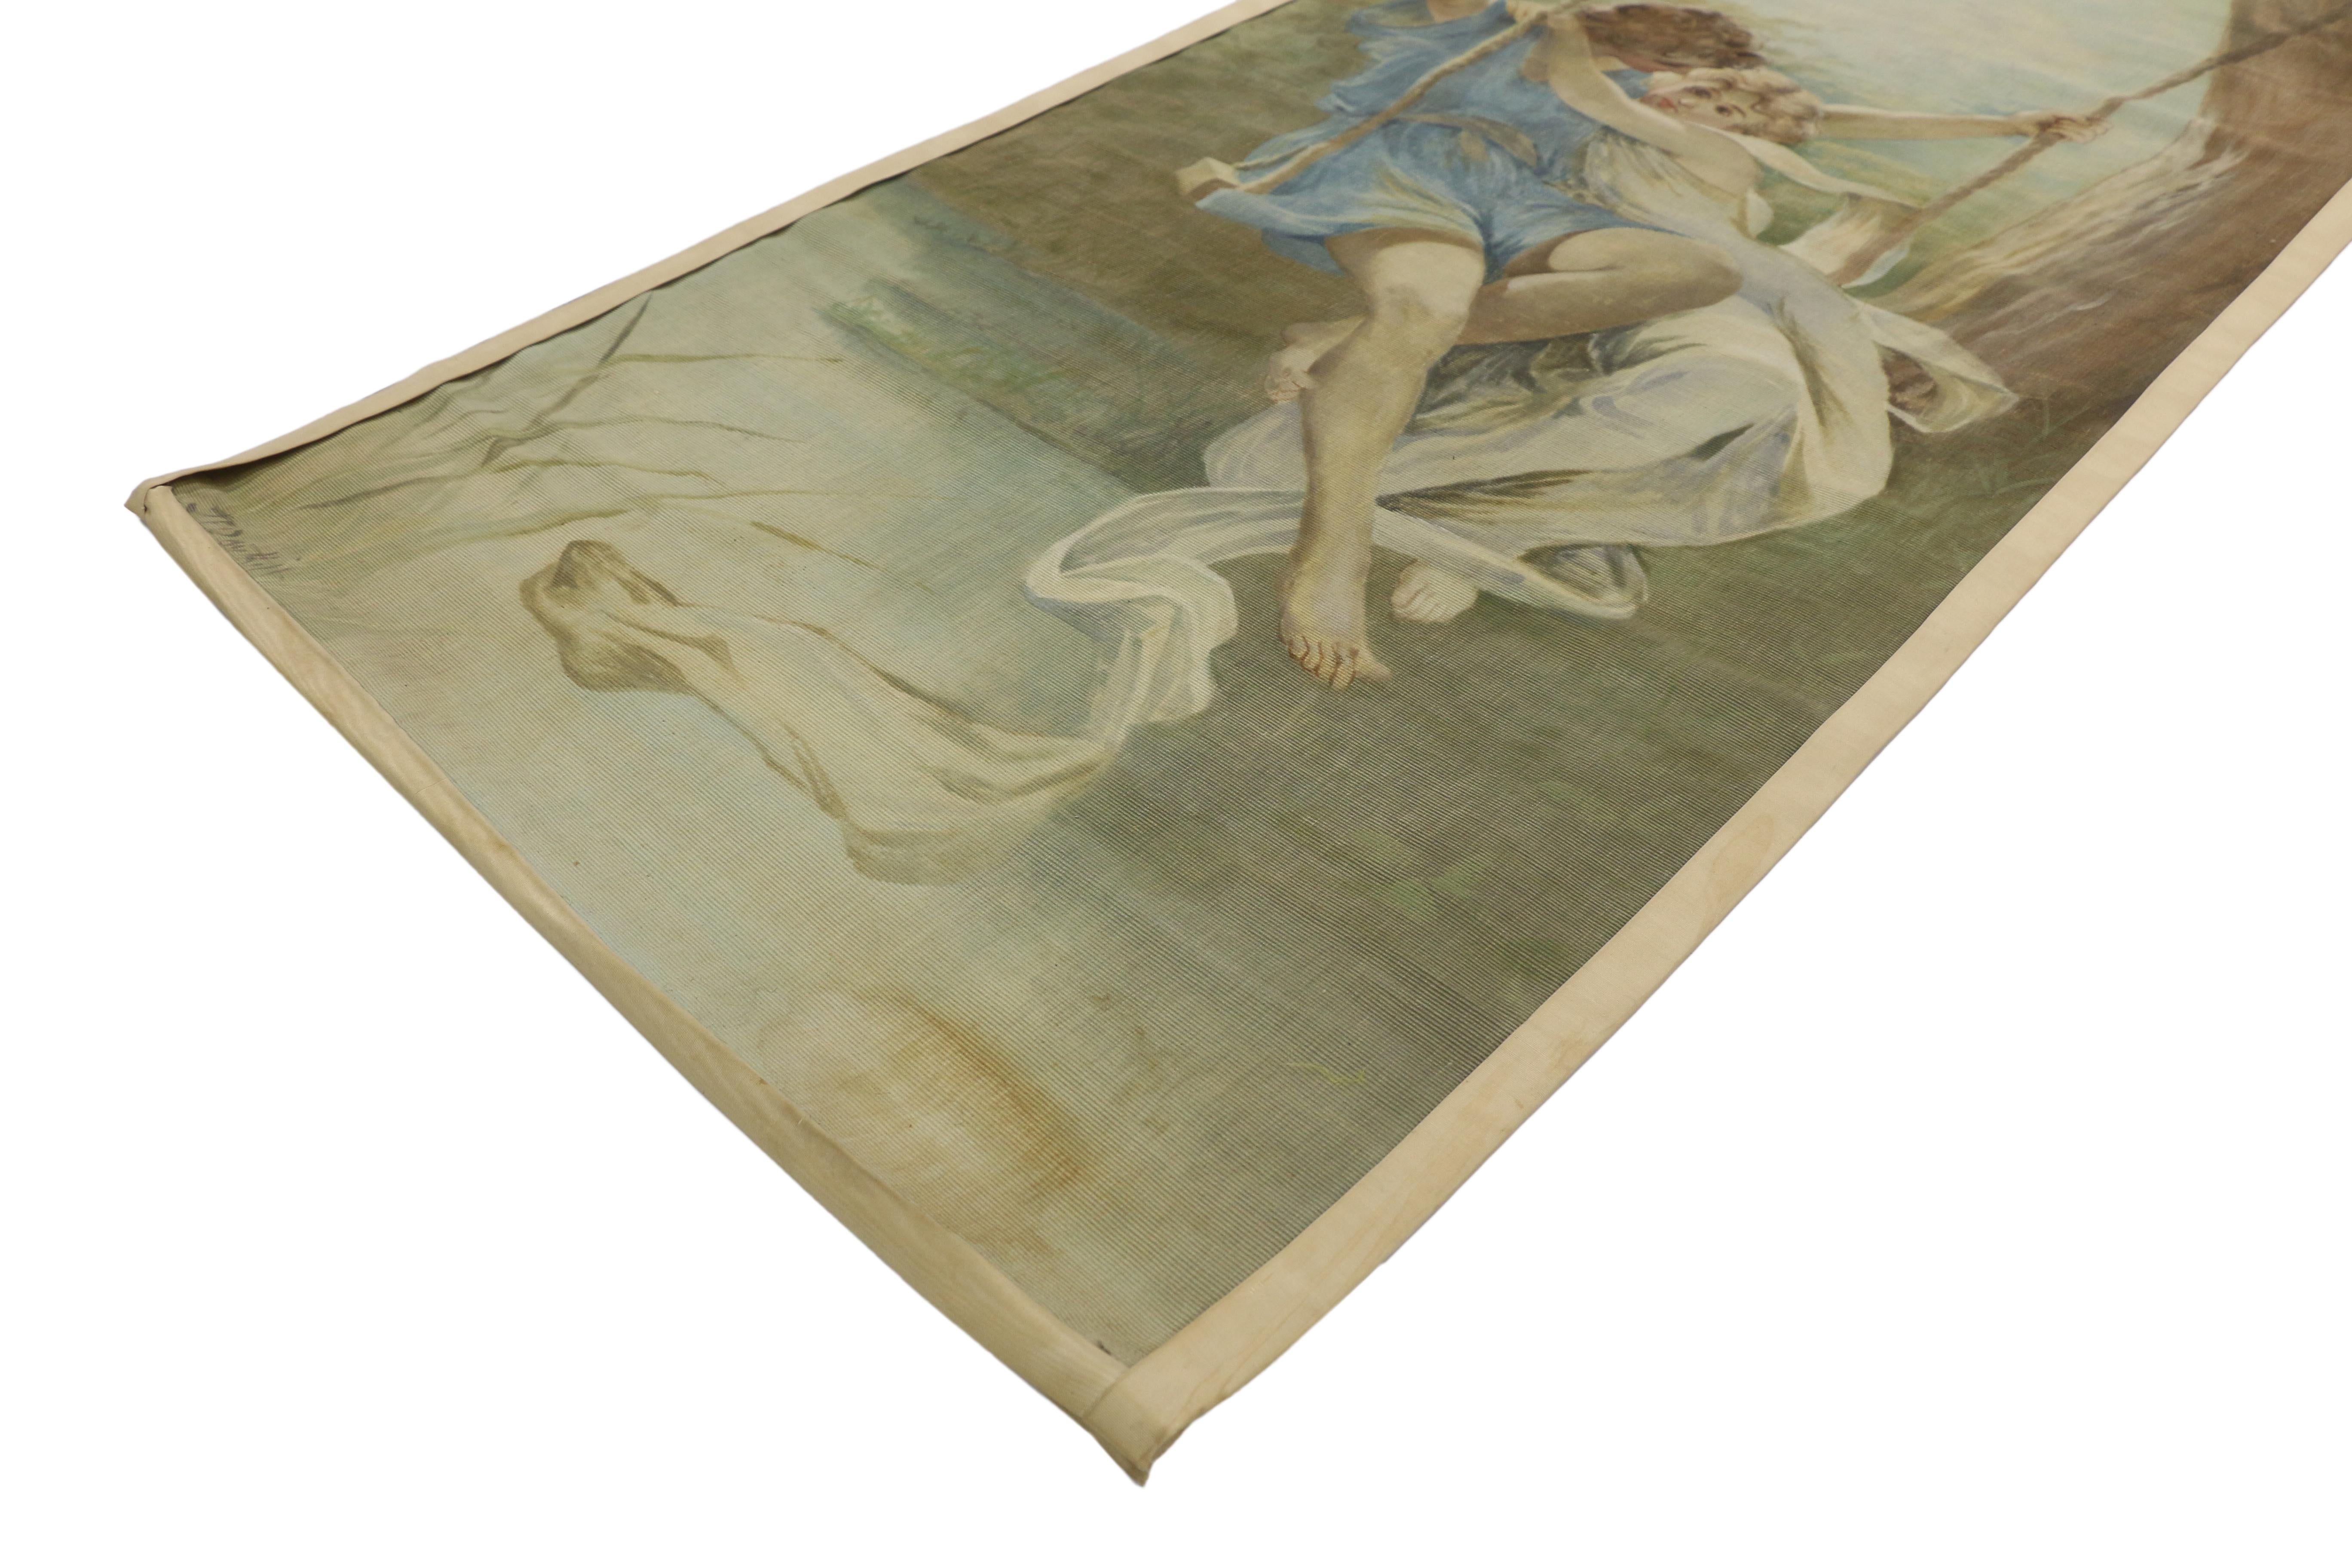 74750 Antique French Rococo Style Tapestry, Le Printemps 'Springtime' inspired by the French artist Pierre-Auguste Cot (1837 - 1883), Neoclassicism Wall Hanging. The original painting is on show at The Metropolitan Museum of Art, New York. Drawing